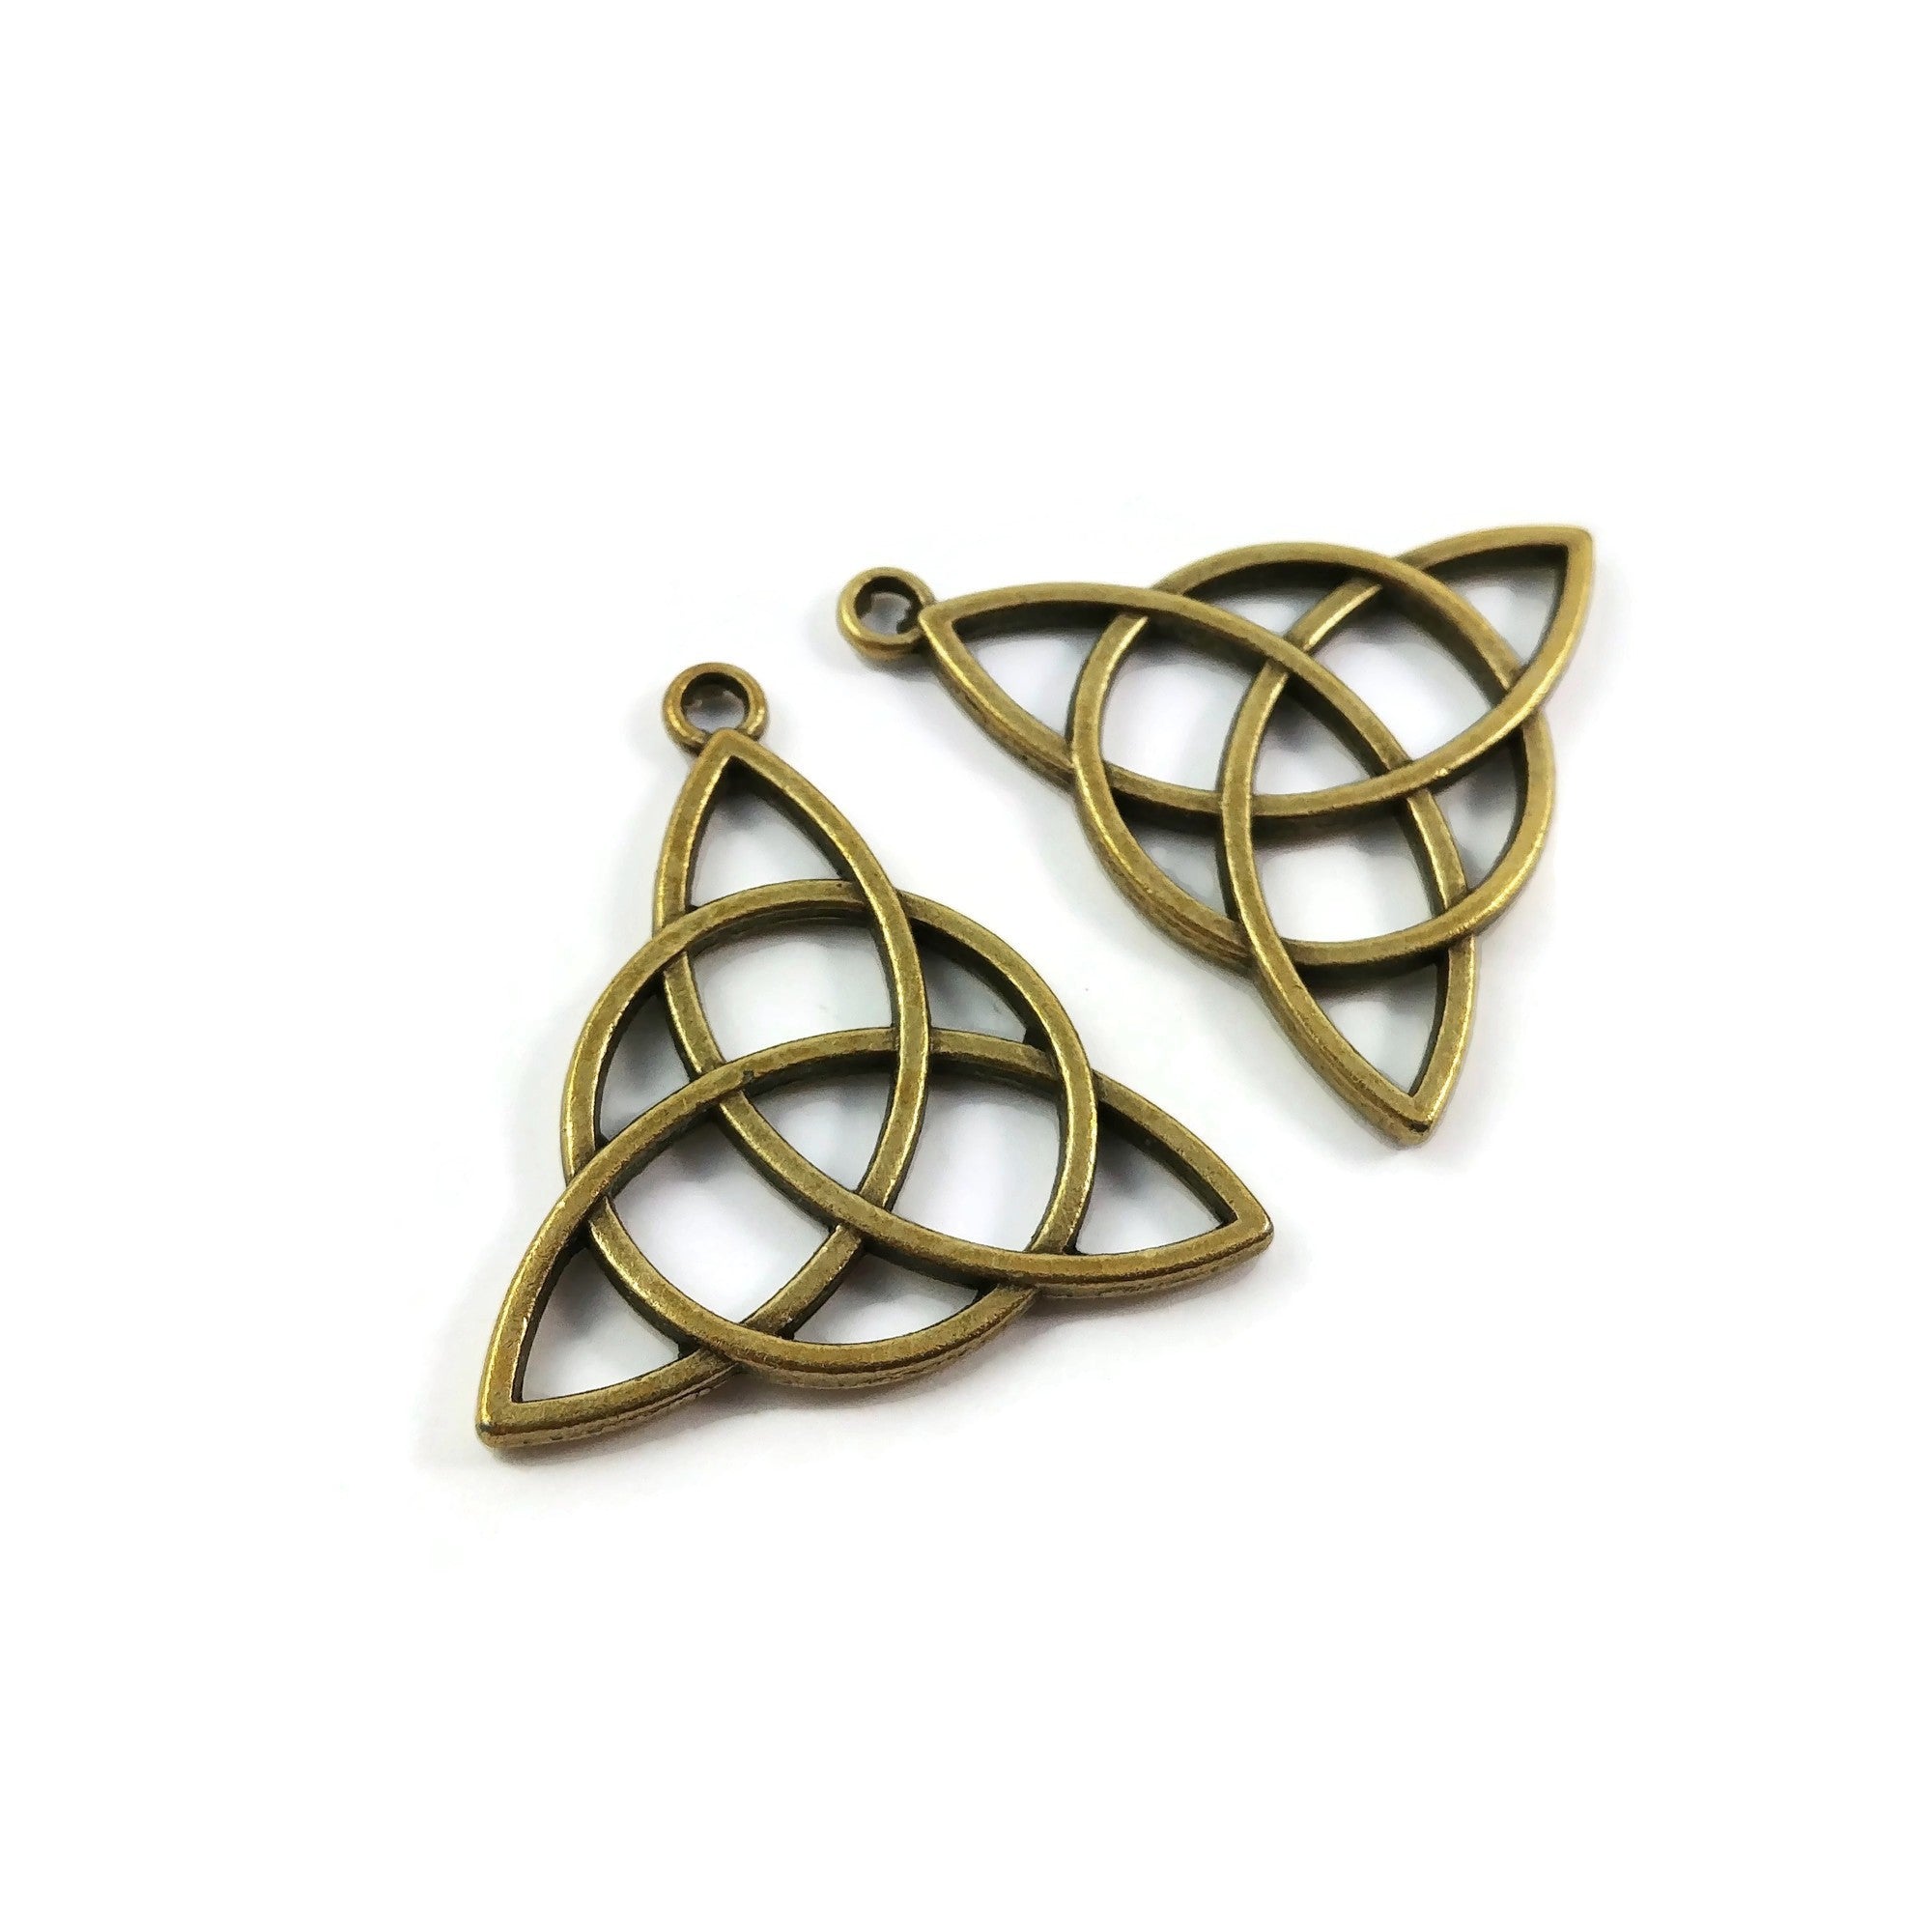 2 celtic triangle knot charms, 30mm antique bronze metal pendants, Nickel free, lead free and cadmium free